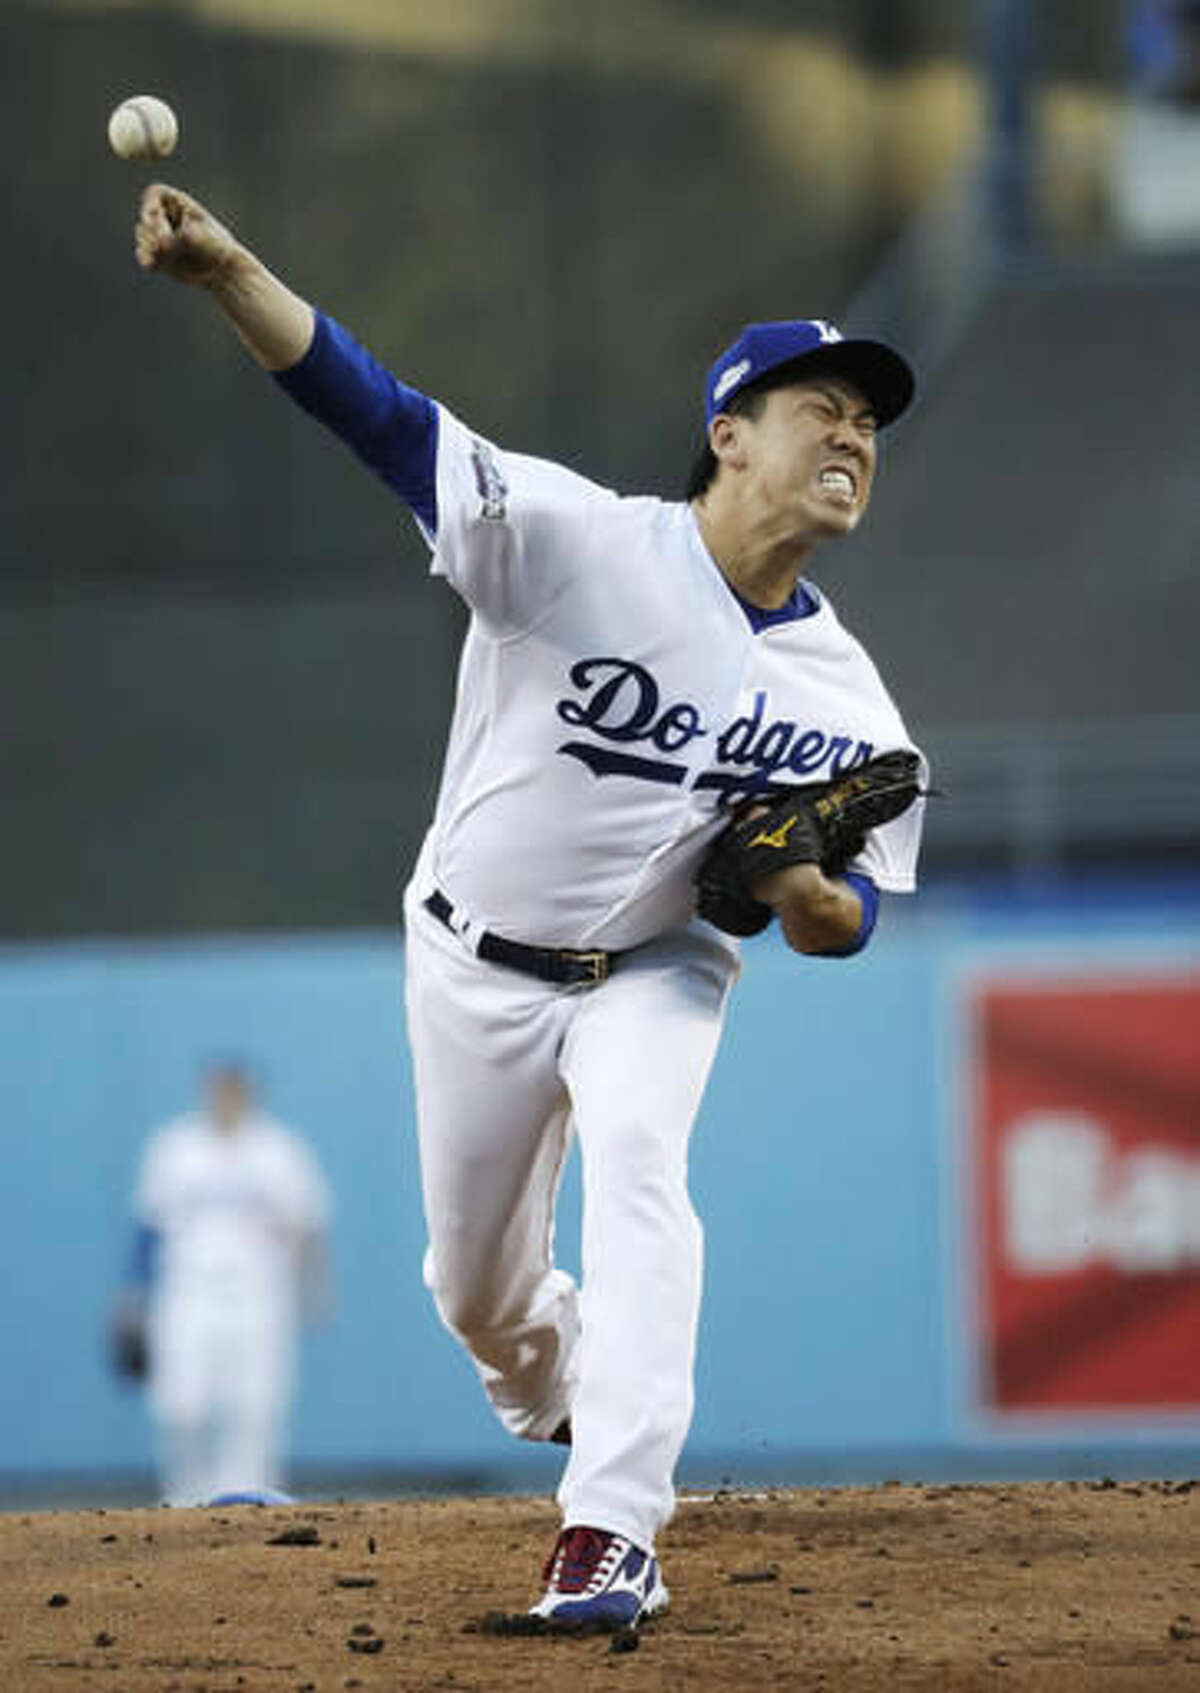 Los Angeles Dodgers starting pitcher Kenta Maeda throws during the first inning of Game 5 of the National League baseball championship series against the Chicago Cubs Thursday, Oct. 20, 2016, in Los Angeles. (AP Photo/David J. Phillip)